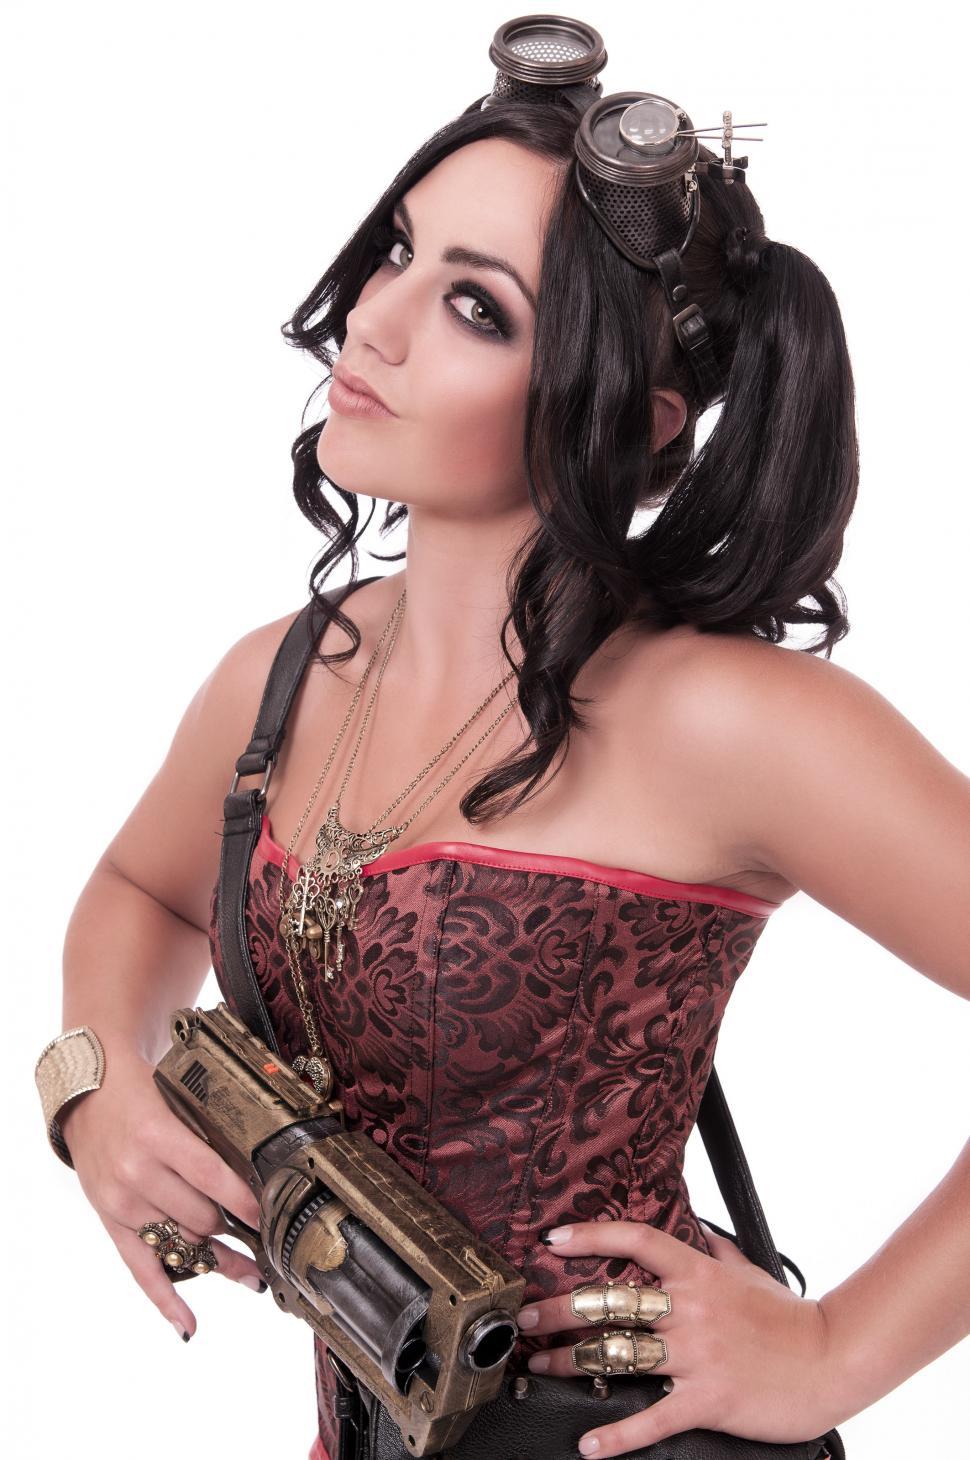 Free Image of Steampunk girl with antique gun 